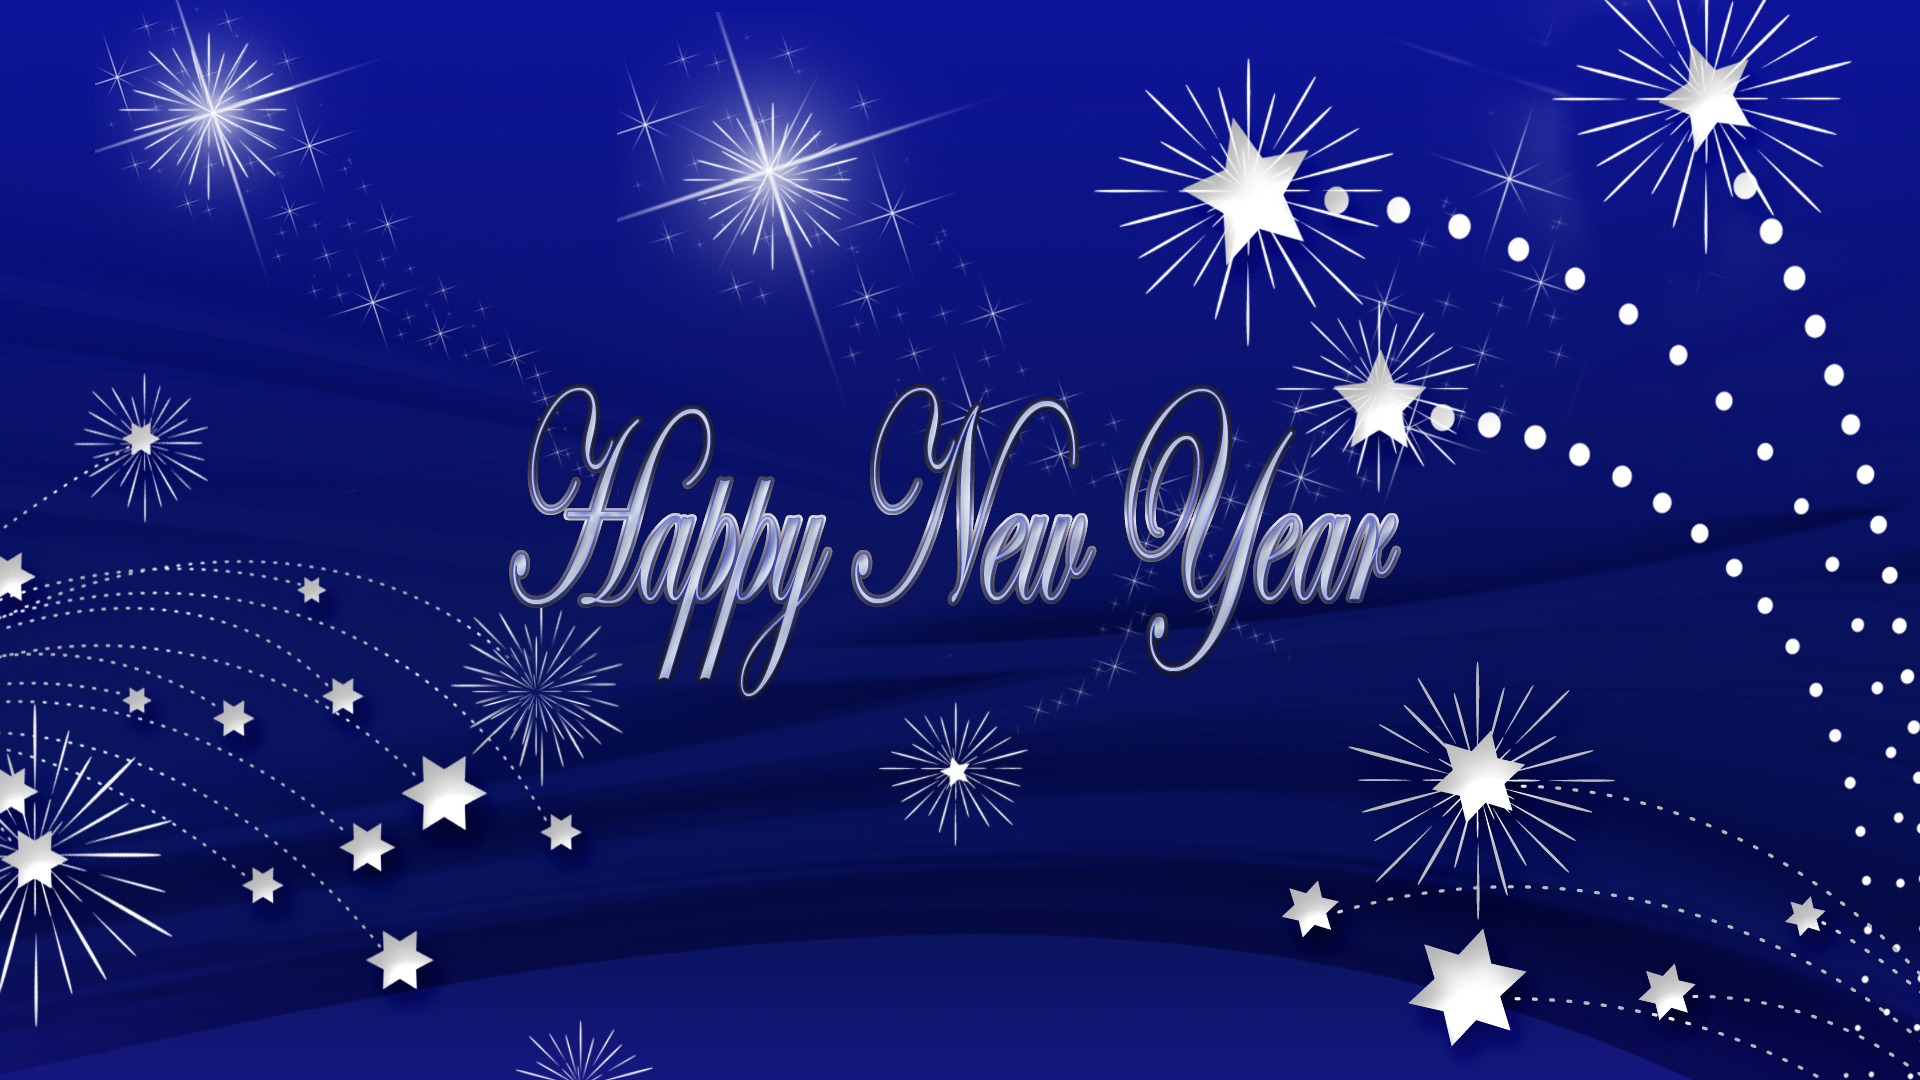 happy new year pictures free download